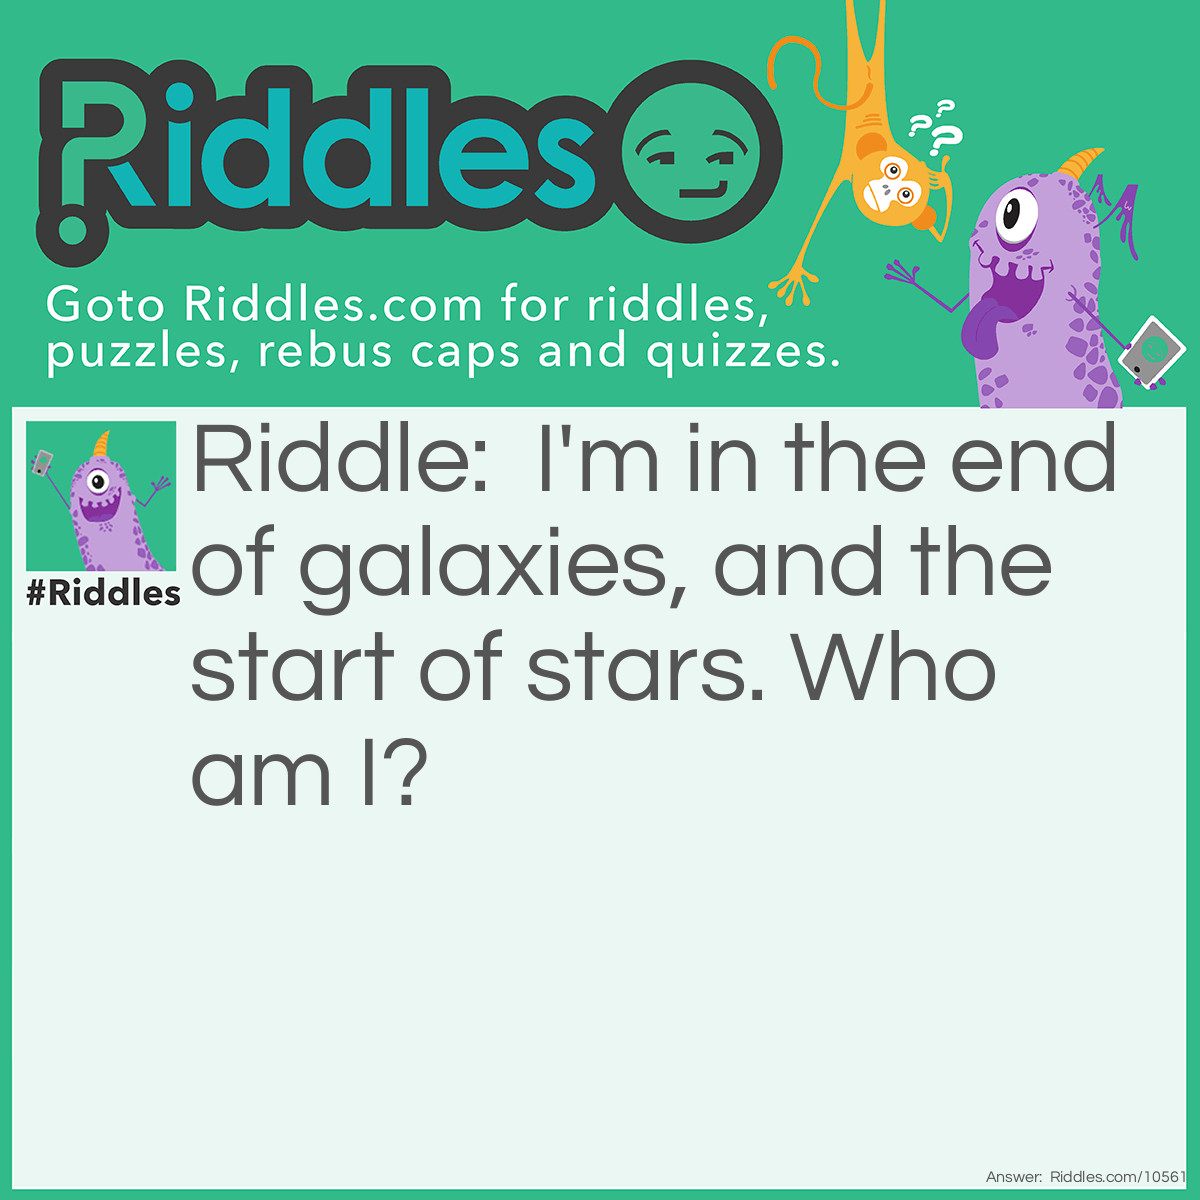 Riddle: I'm in the end of galaxies, and the start of stars. Who am I? Answer: The letter S!